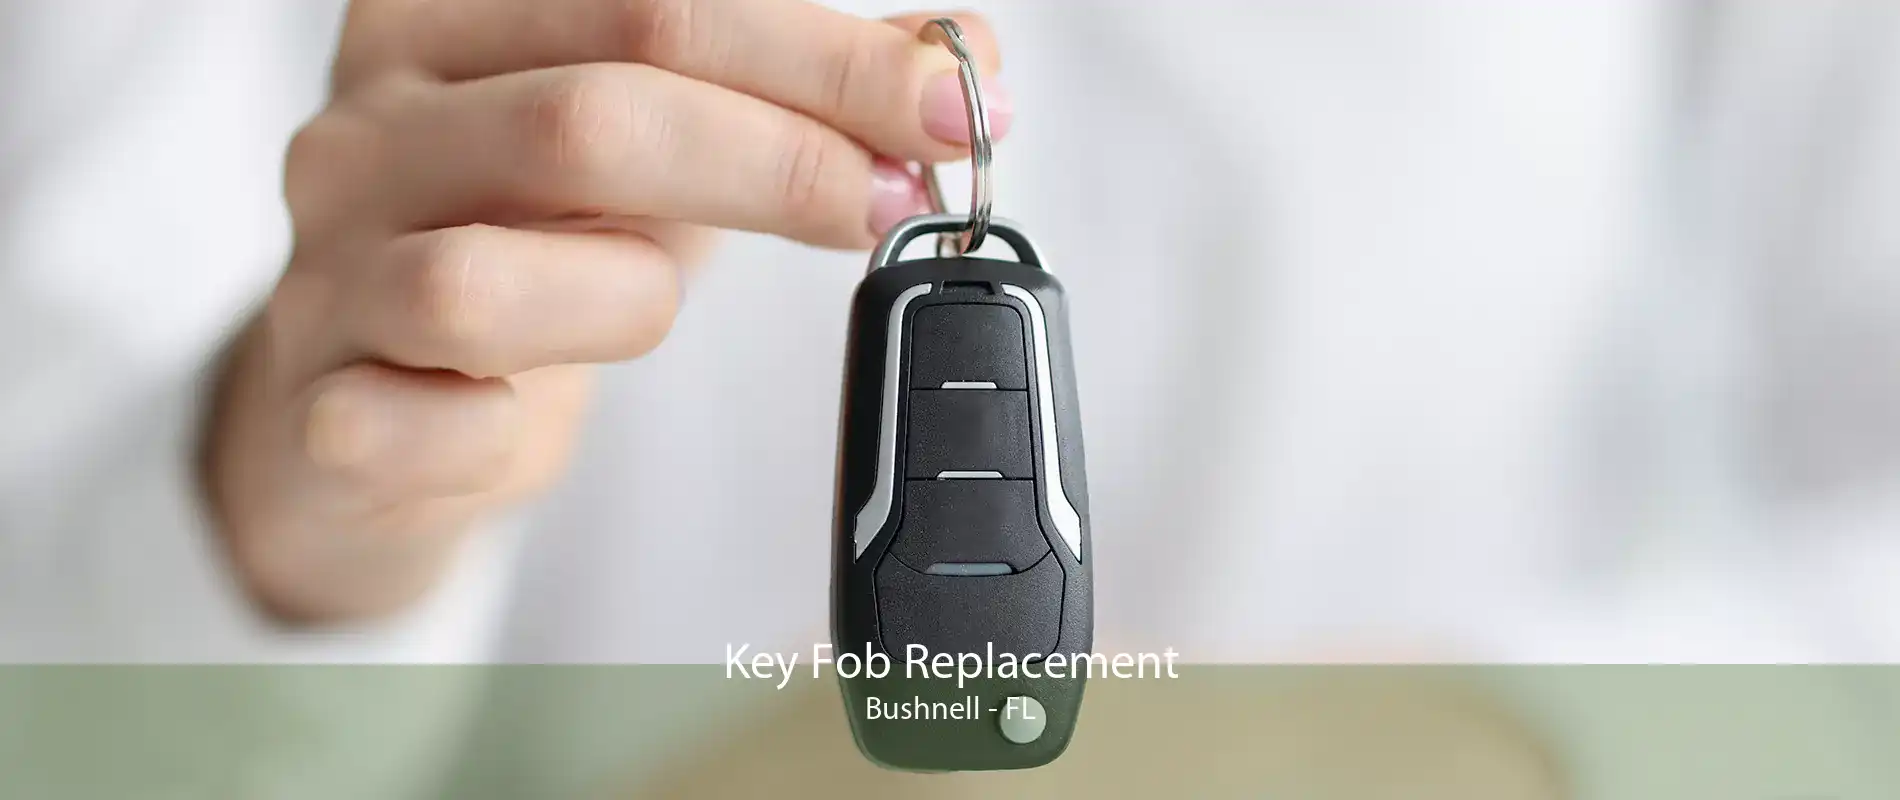 Key Fob Replacement Bushnell - FL